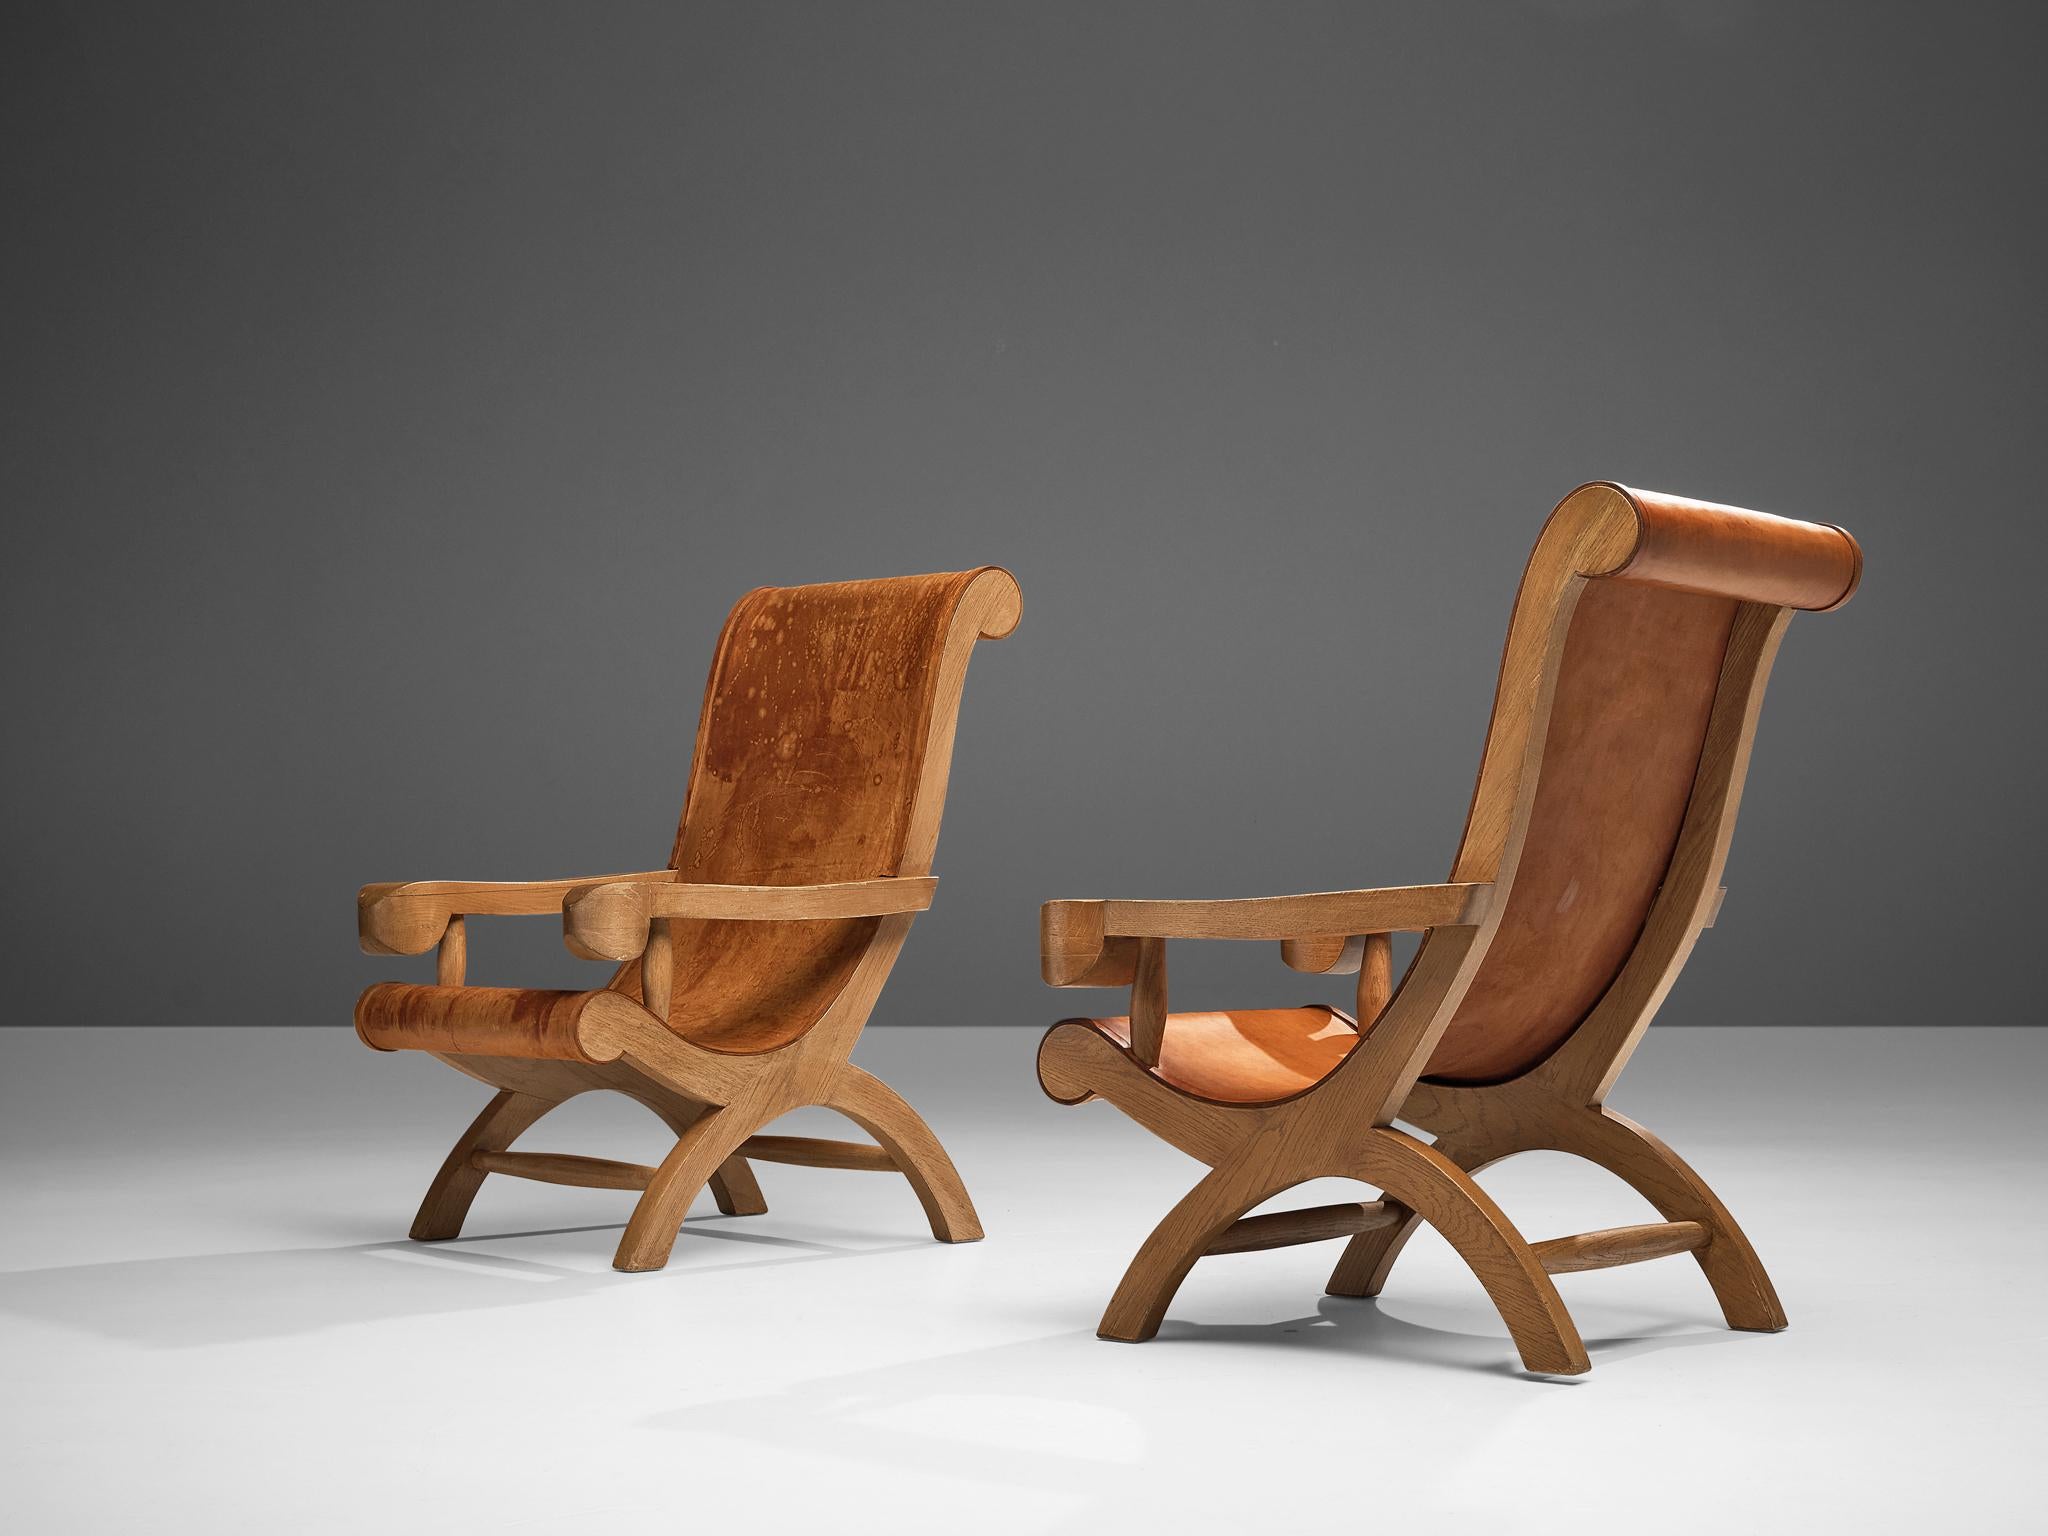 Mid-20th Century Clara Porset Lounge Chairs 'Butaque' in Original Patinated Leather